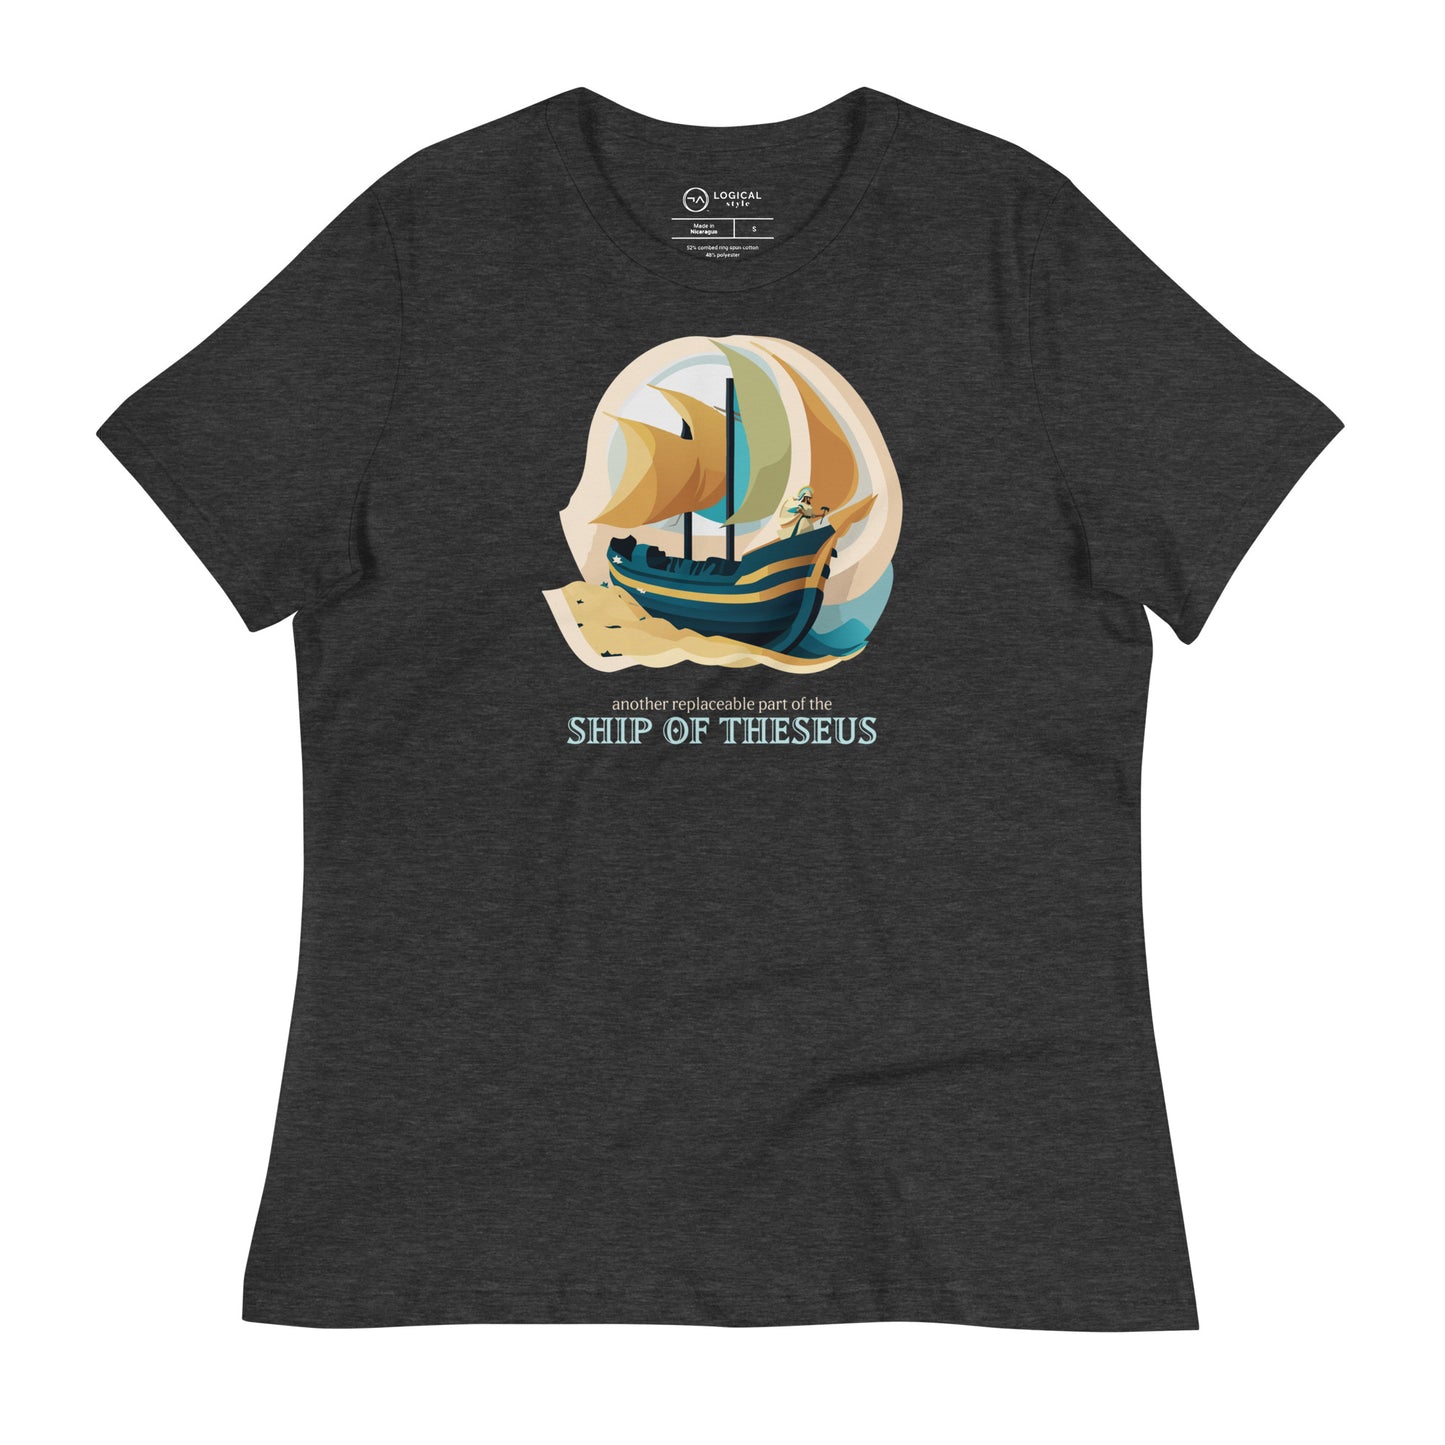 Another Replaceable Part of the Ship of Theseus: Women's Relaxed T-Shirt